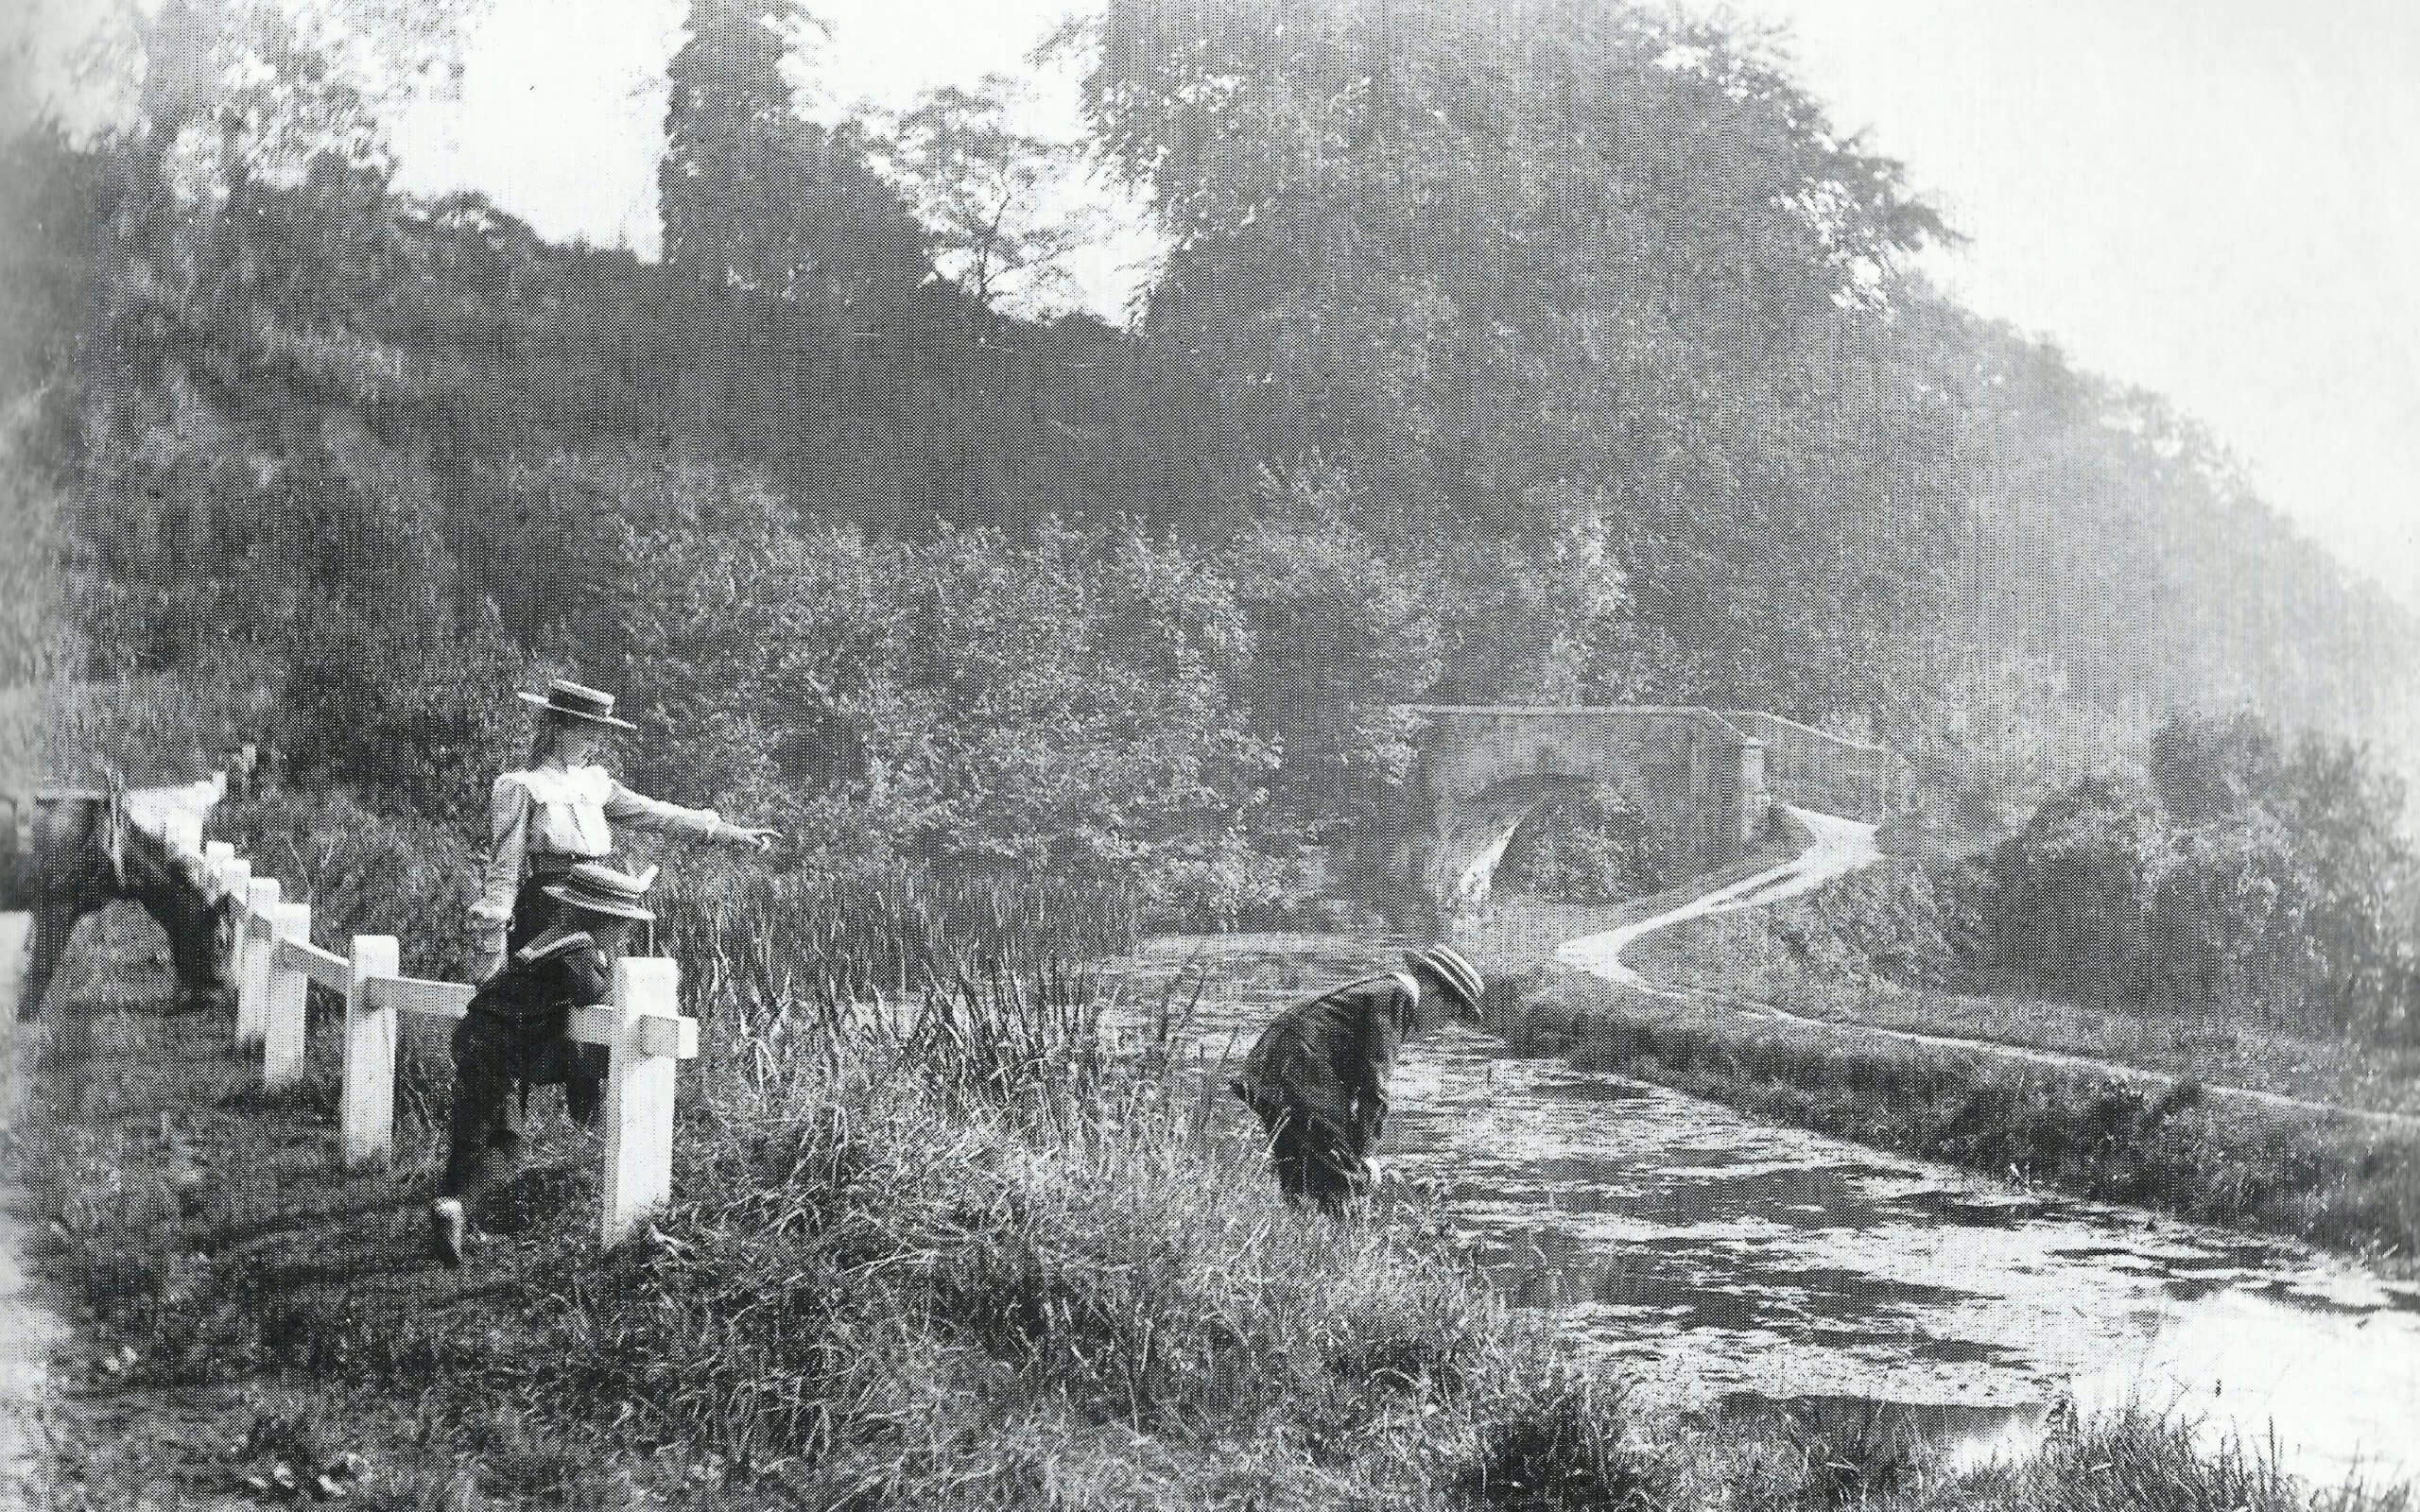 tucking-mill-bridge-with-children-about-1904